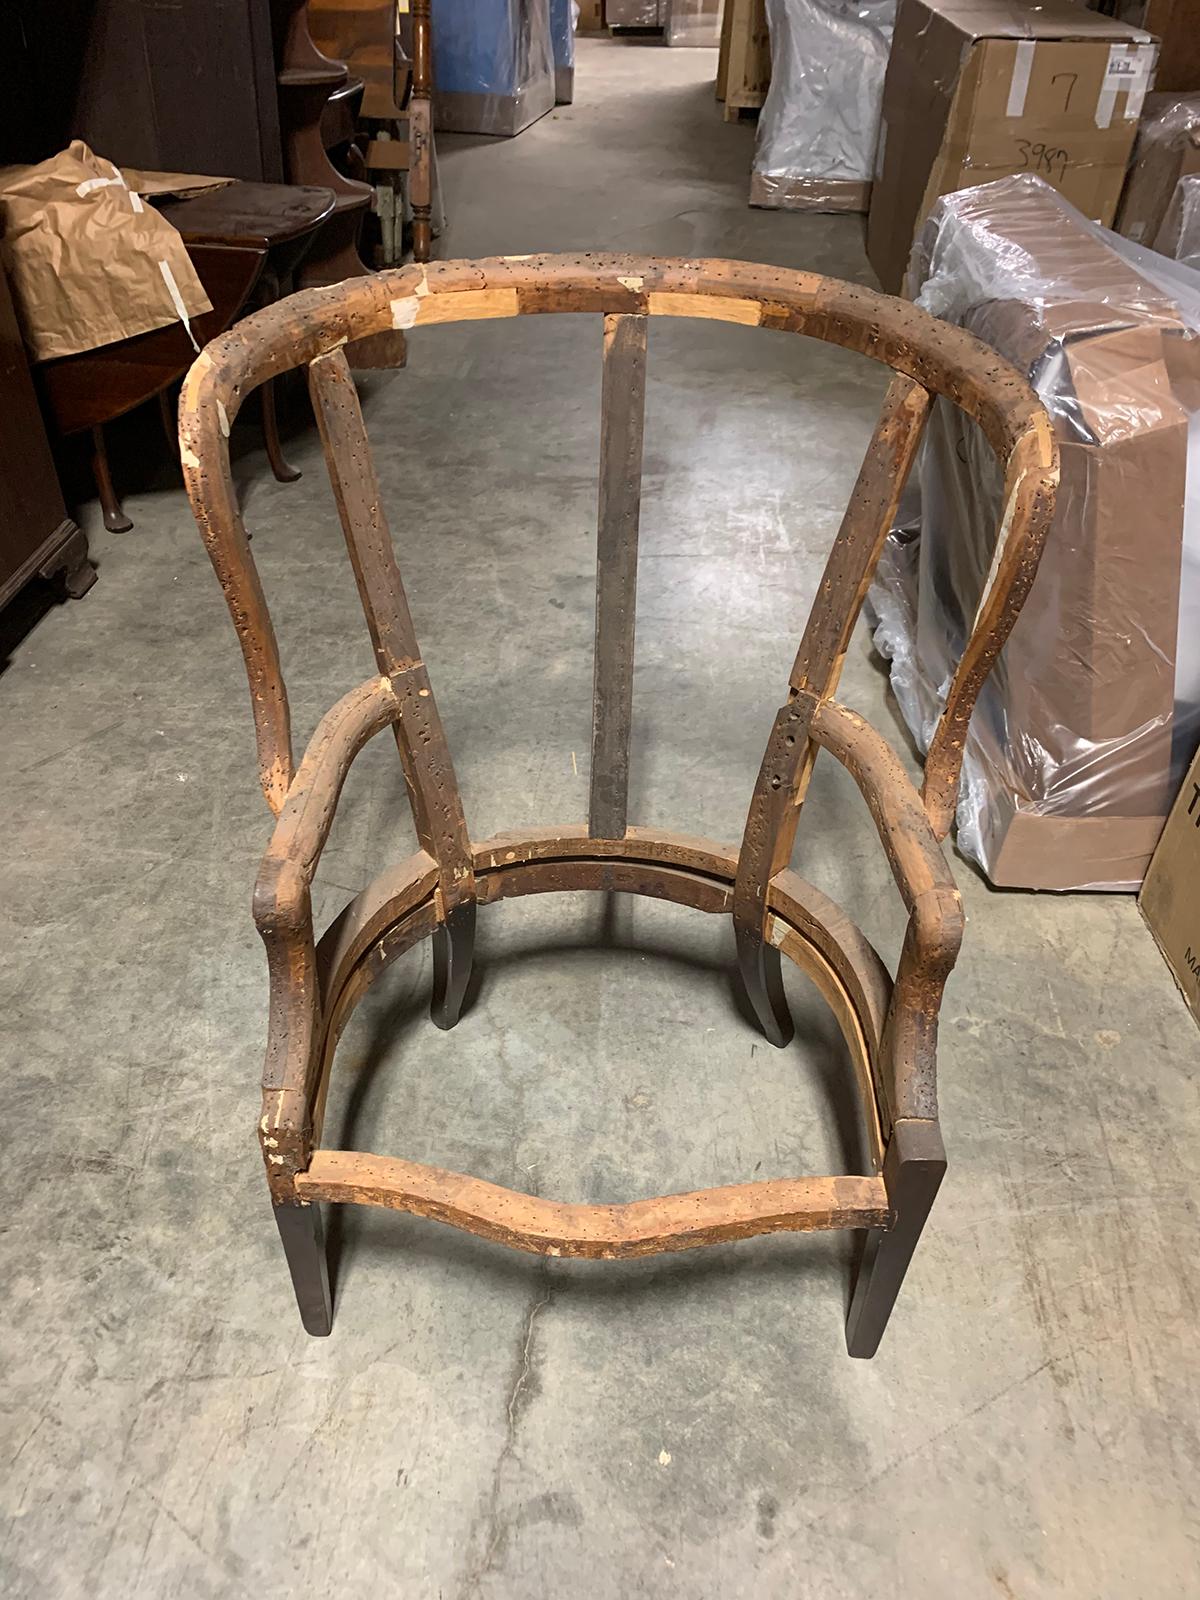 Large Scale 18th-19th Century English Barrel Wingback Chair Frame For Sale 7